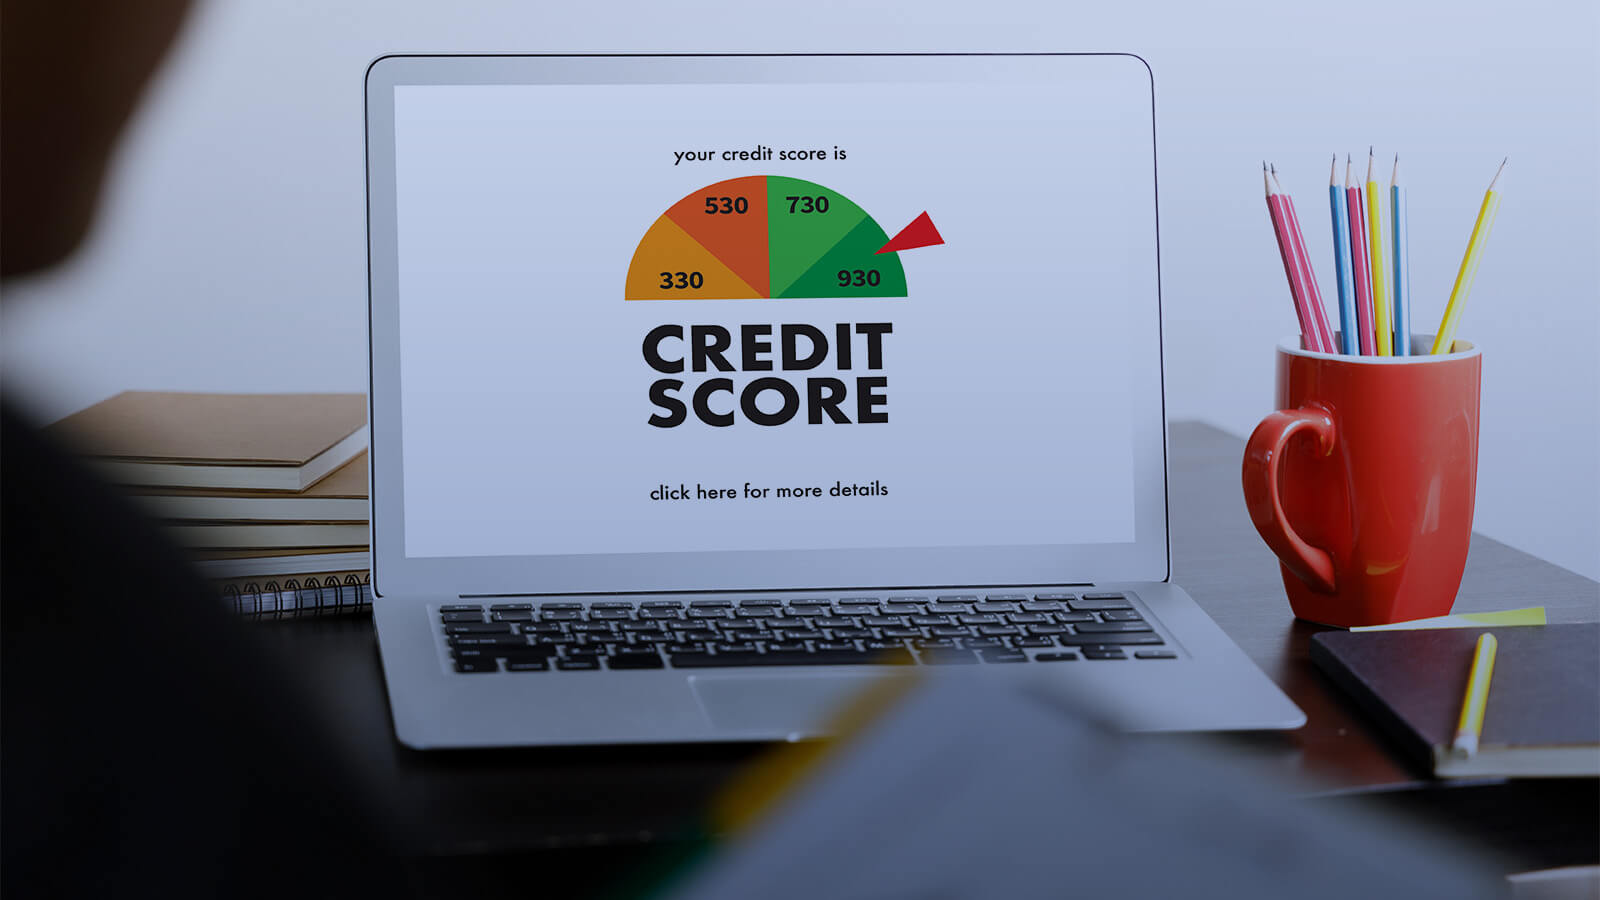 Monitoring credit scores and identifying issues